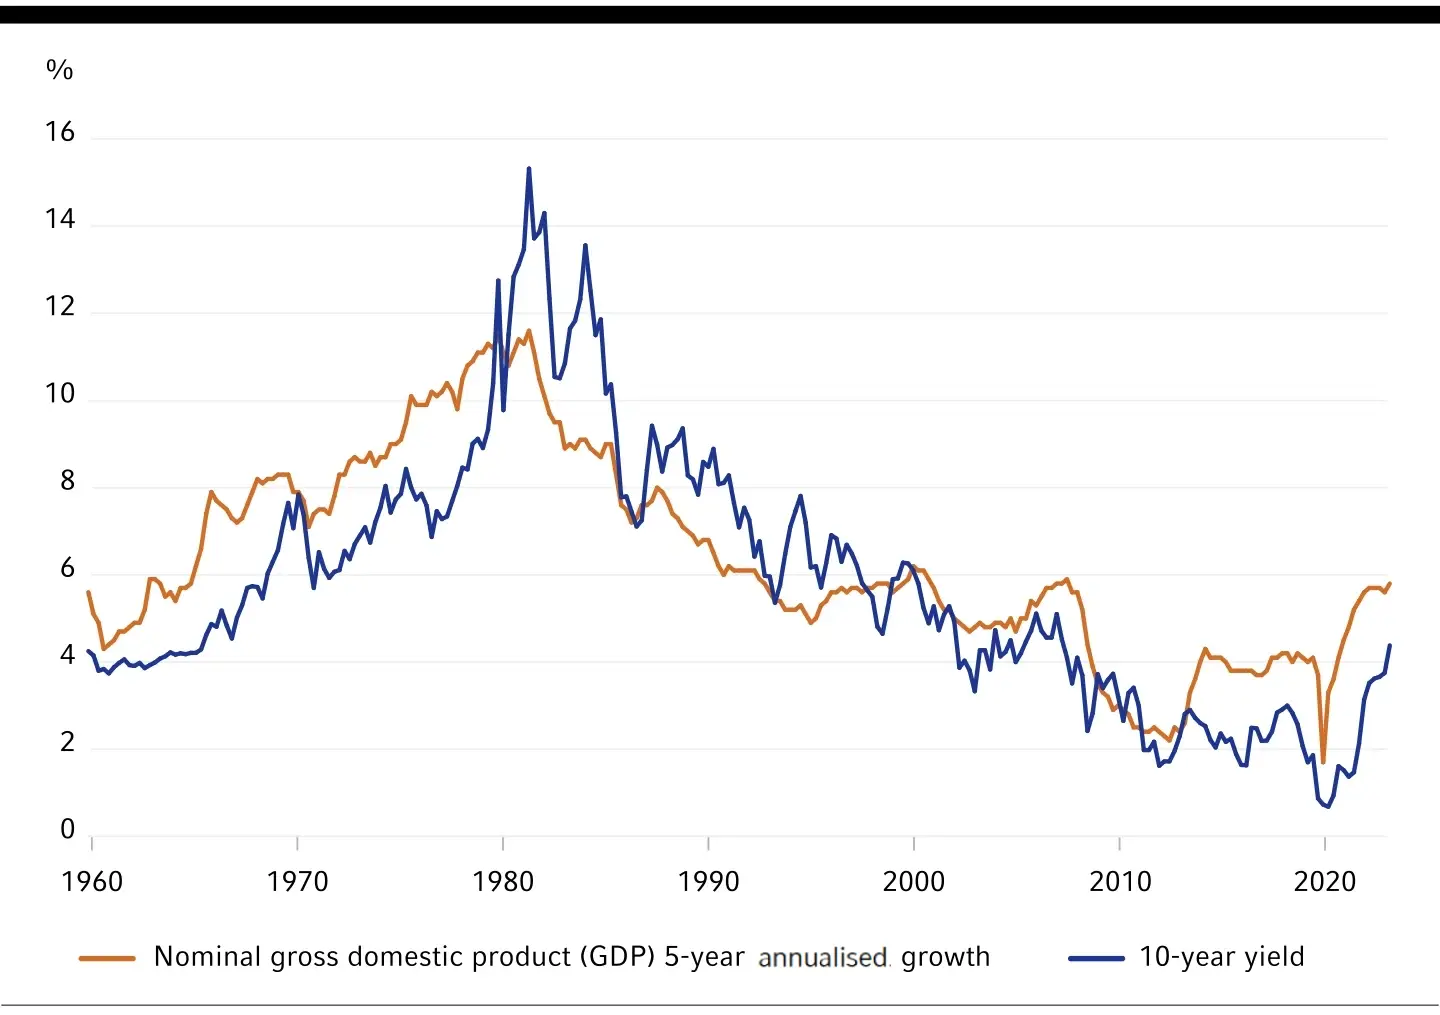 Nominal U.S. GDP growth & 10-year yield